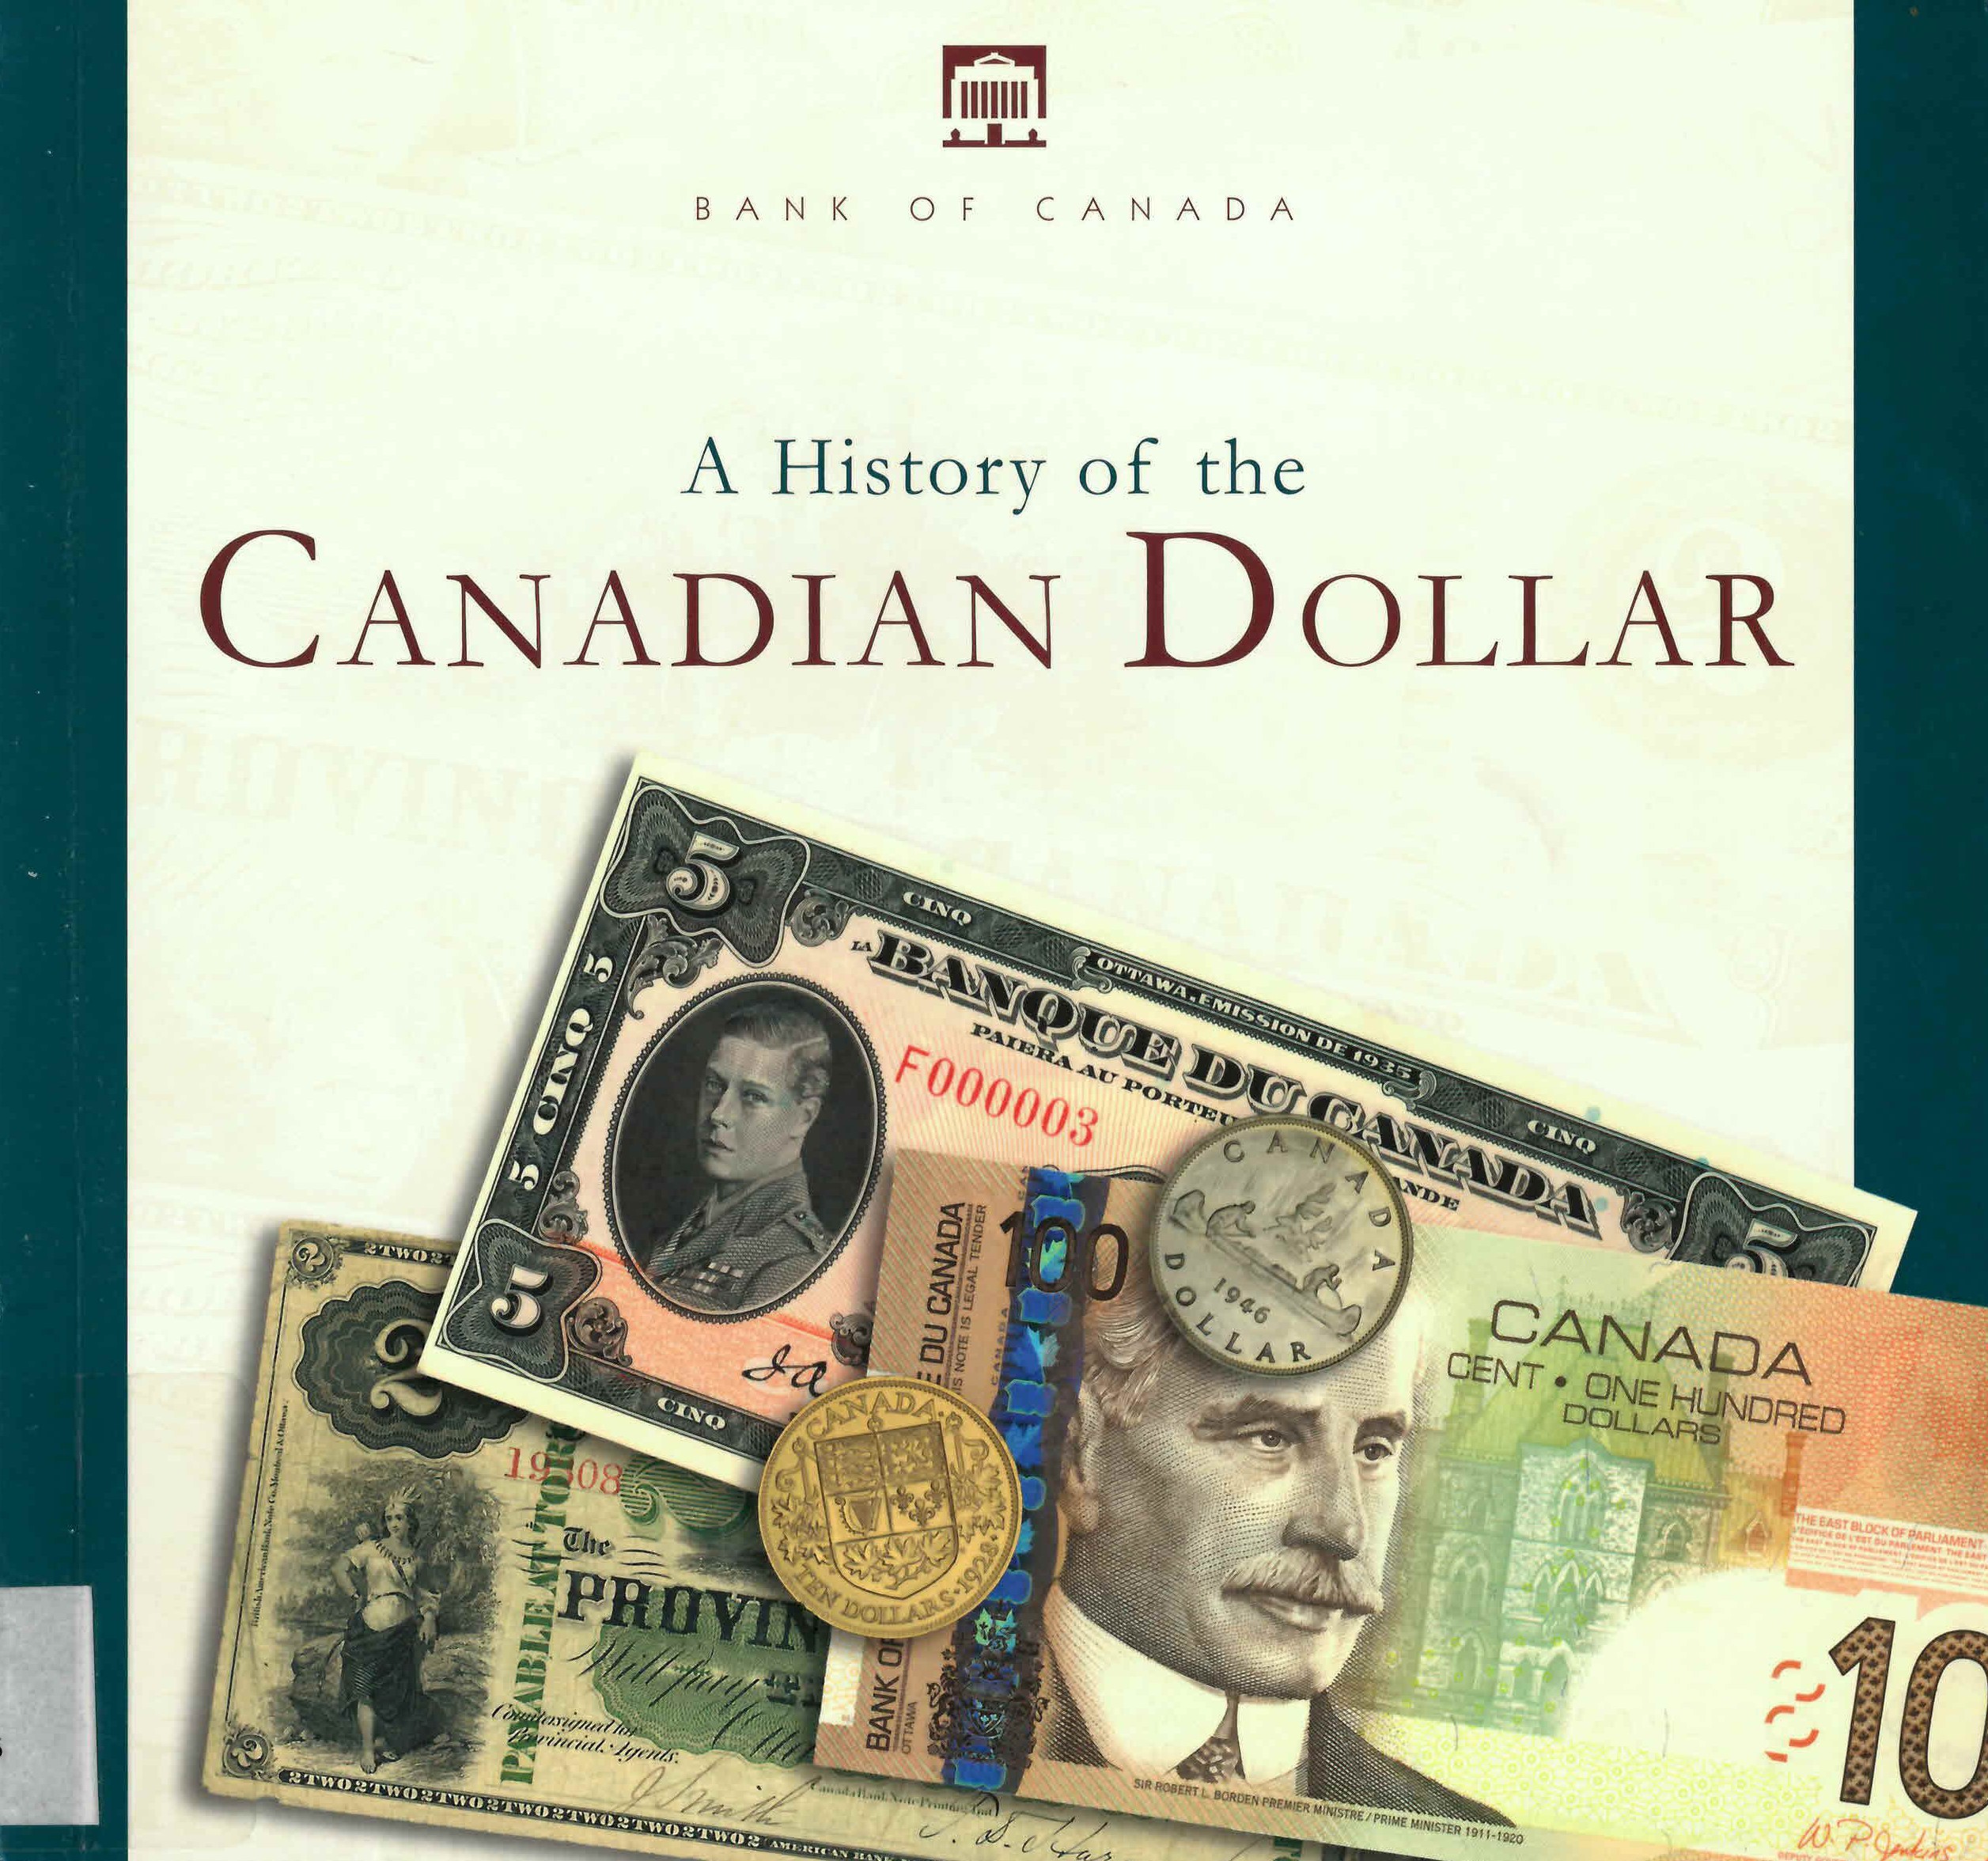 A history of the Canadian dollar